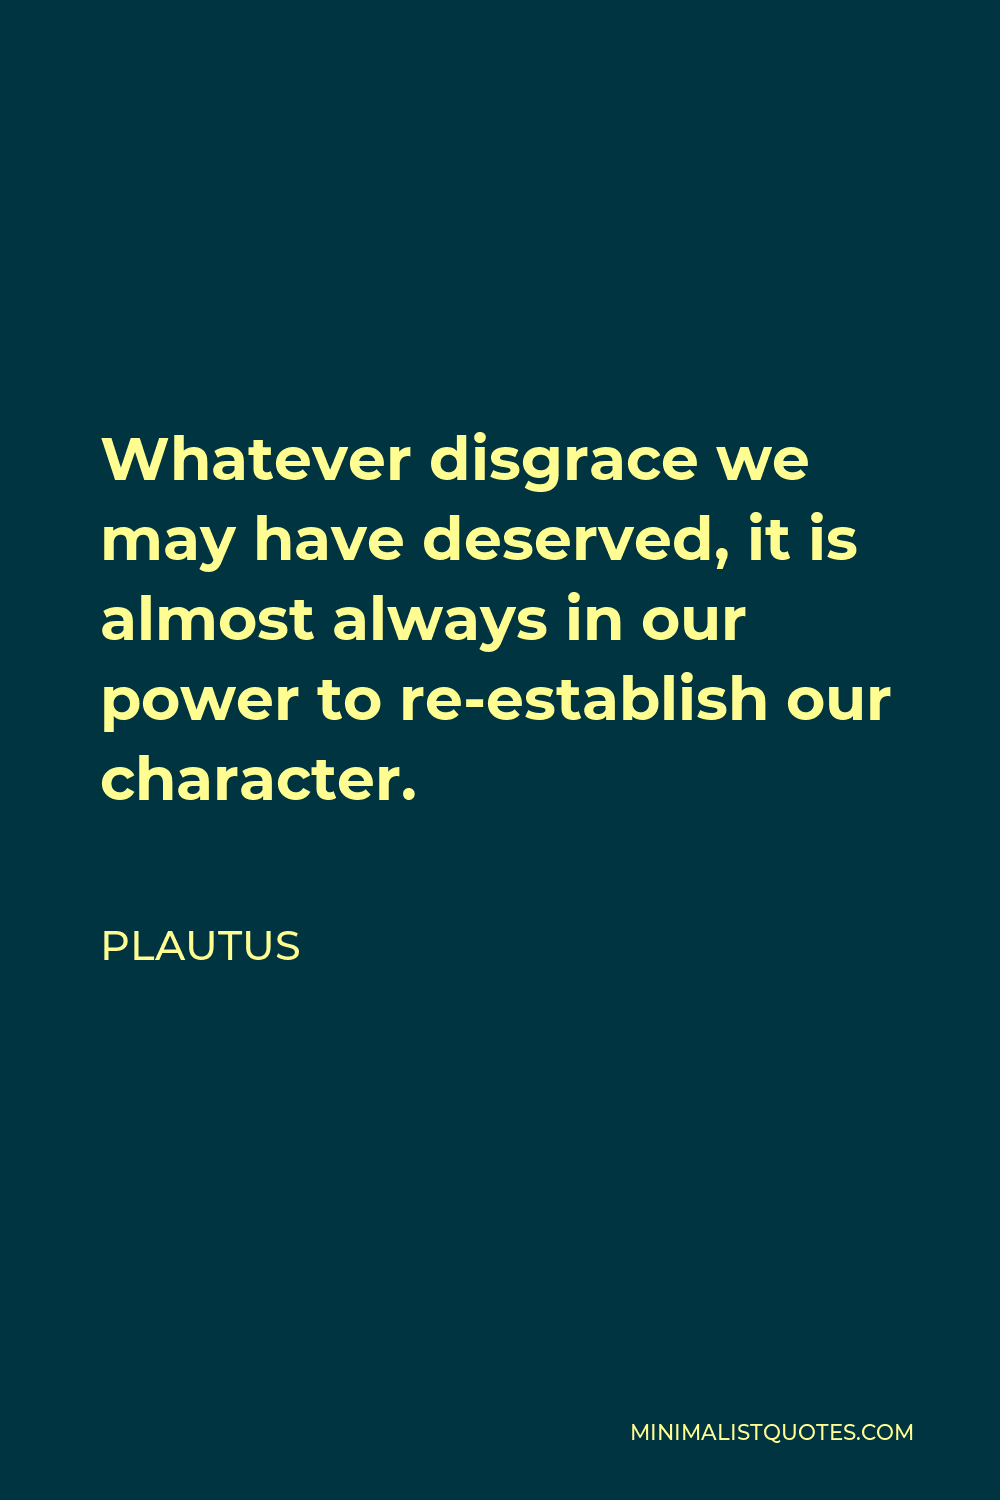 Plautus Quote - Whatever disgrace we may have deserved, it is almost always in our power to re-establish our character.